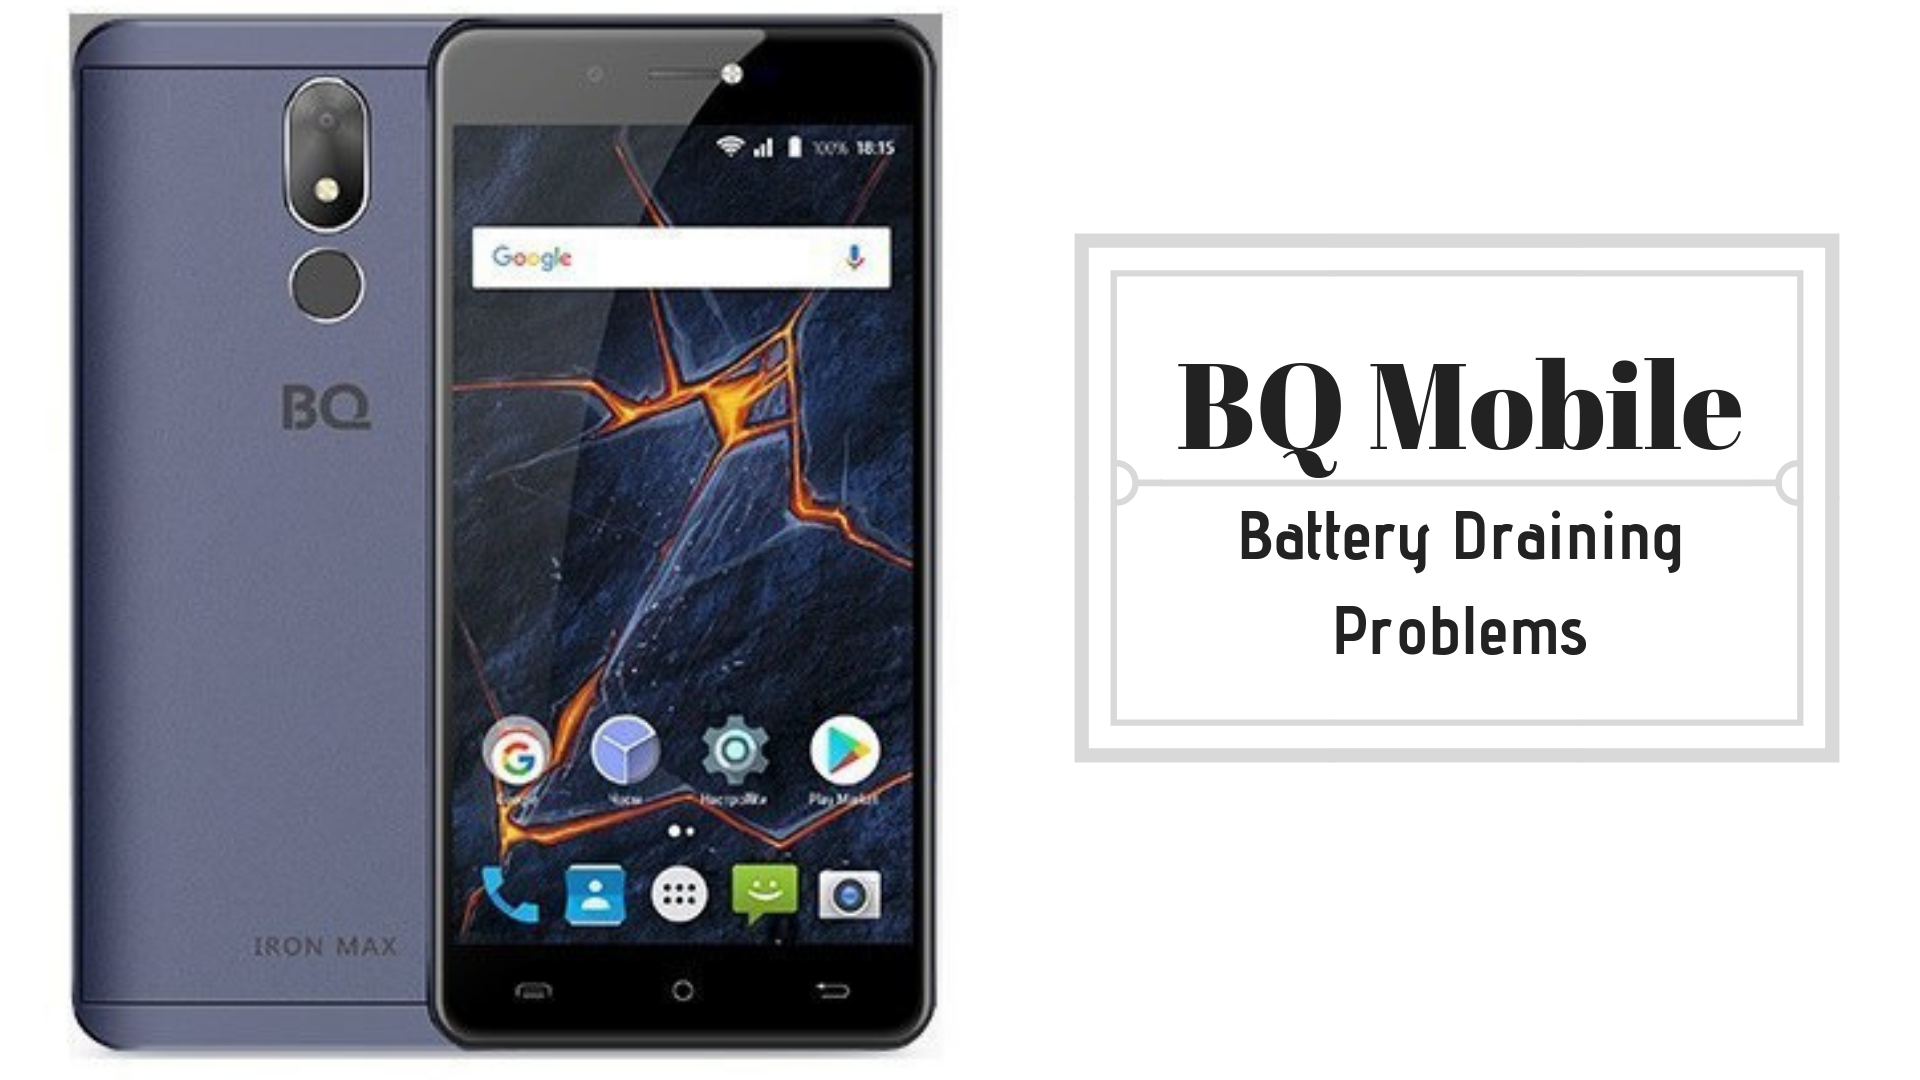 How to Fix BQ Mobile Battery Draining Problems - Troubleshooting and Fixes